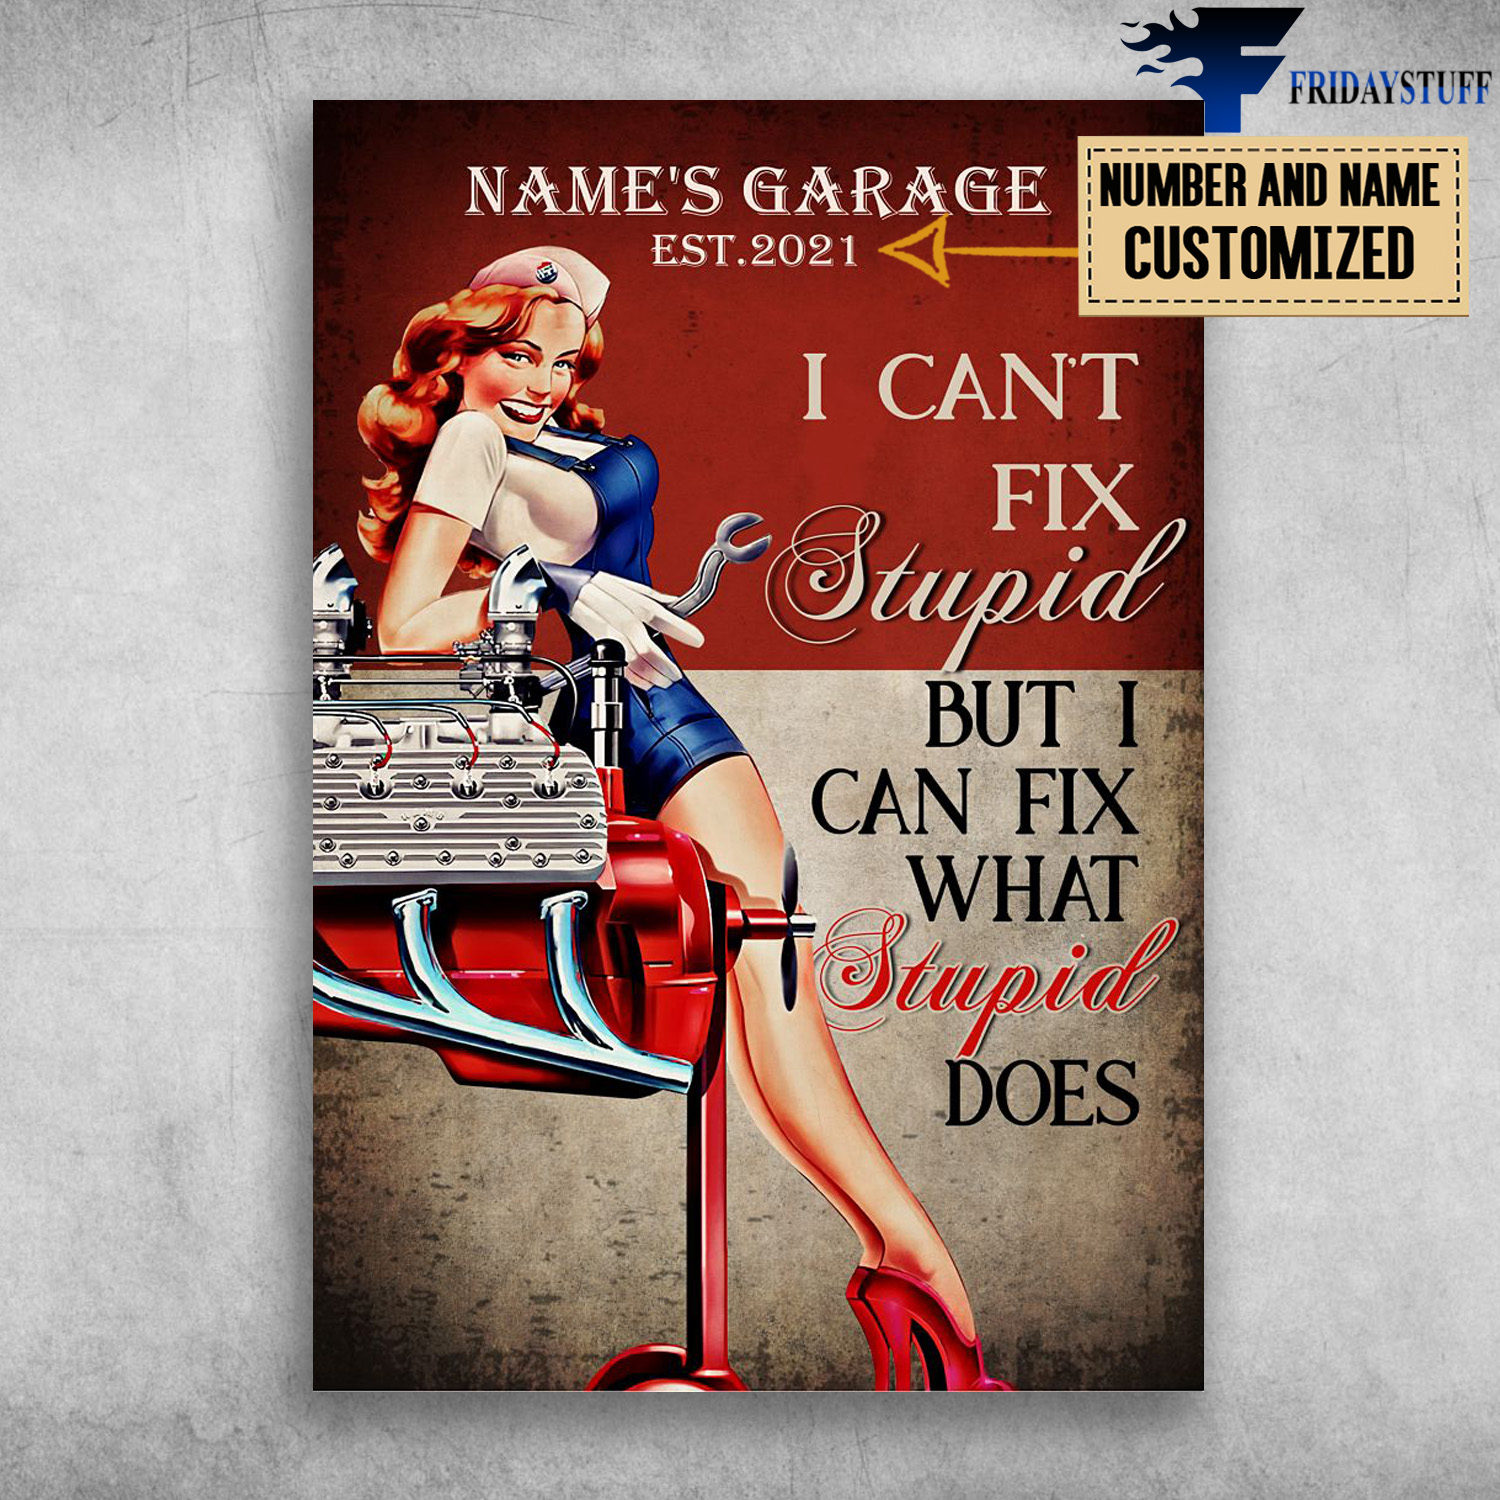 Lady Garage, I Can't Fix Stupid, But I Can Fix What Stupid Does